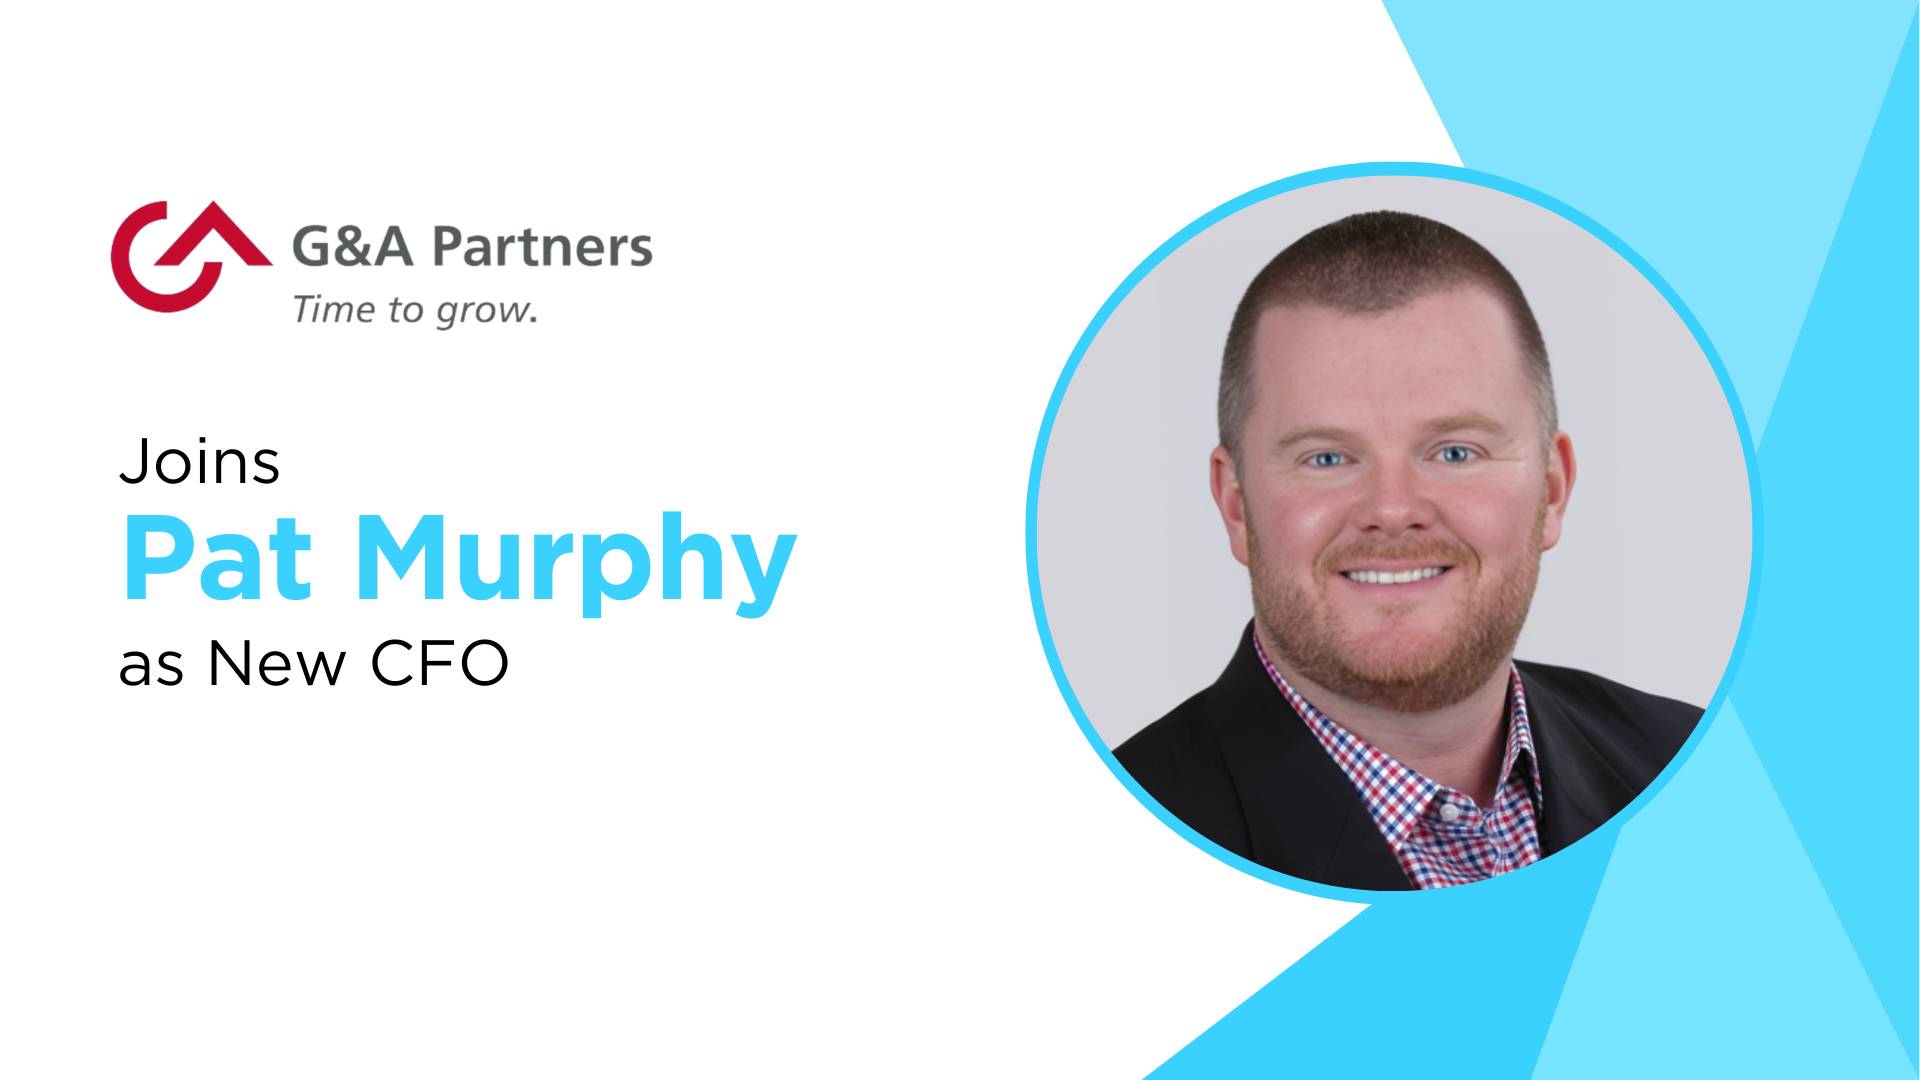 Pat Murphy Joins G&A Partners as CFO, Bringing Extensive Healthcare and Finance Expertise